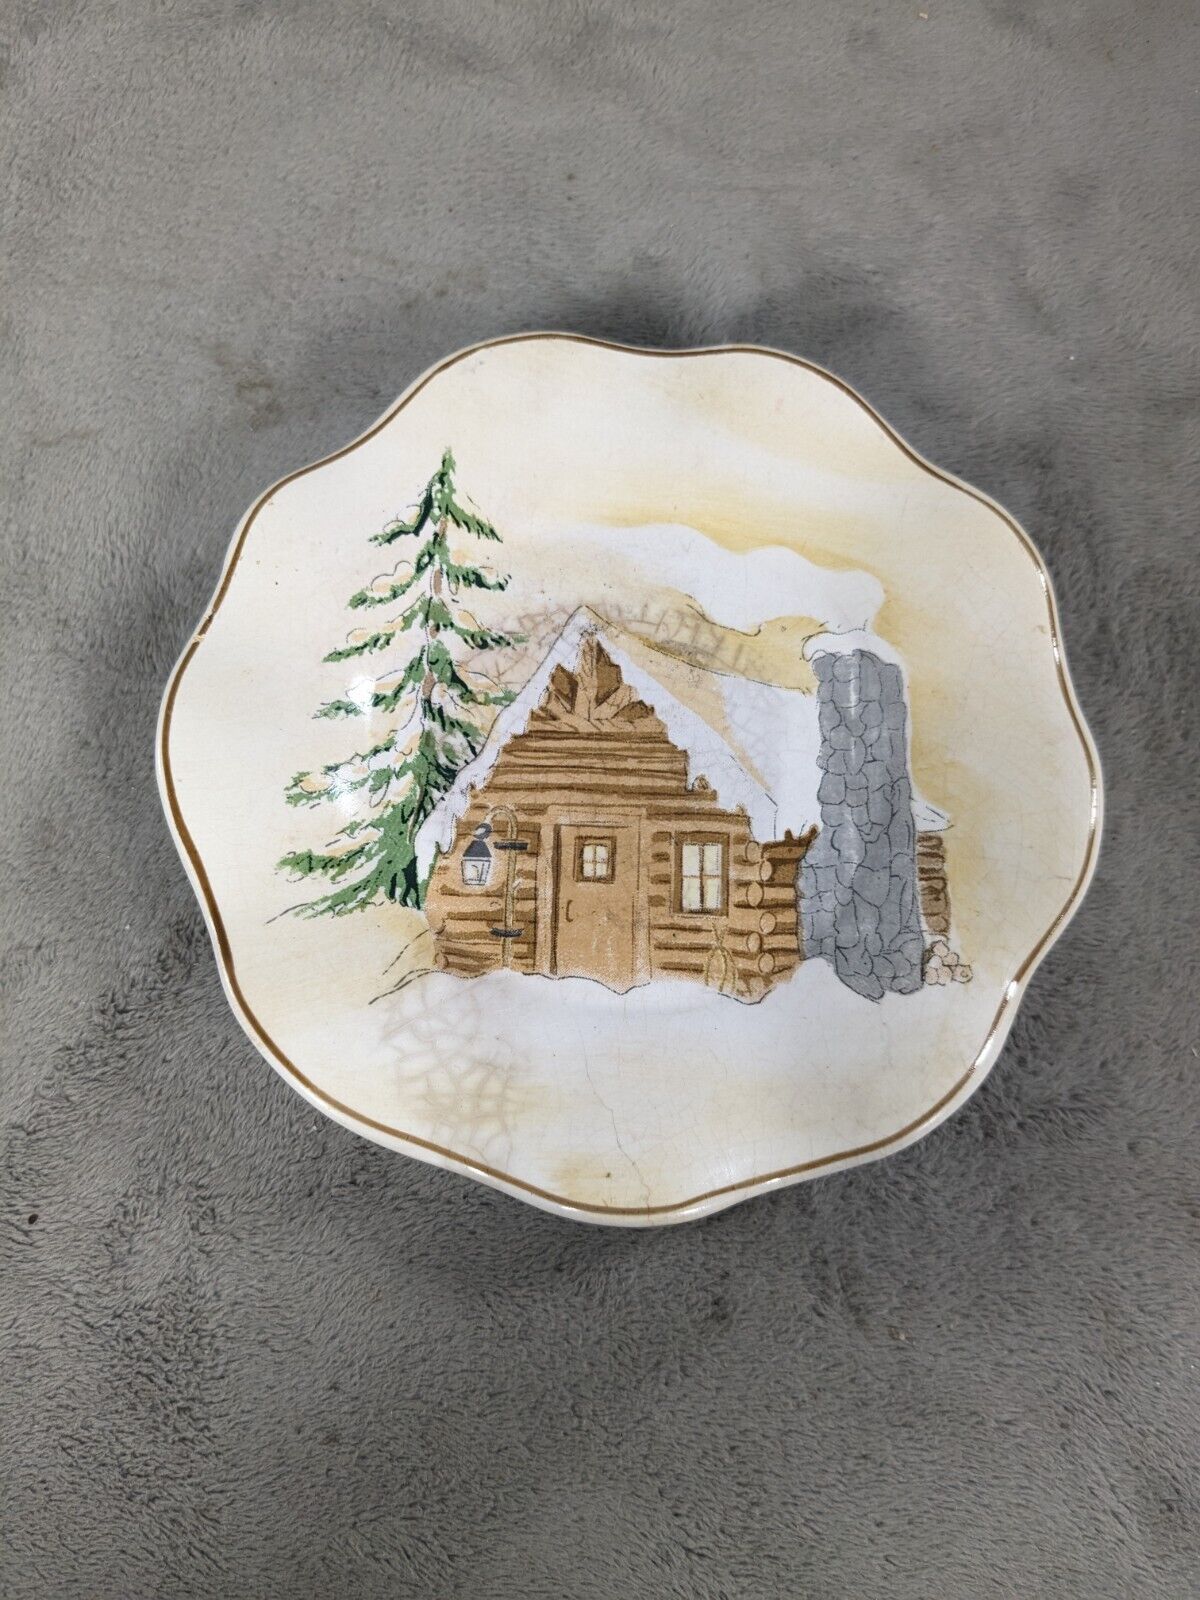 Vintage Small Christmas Plate With Feet, Hand Painted With Log Cabin